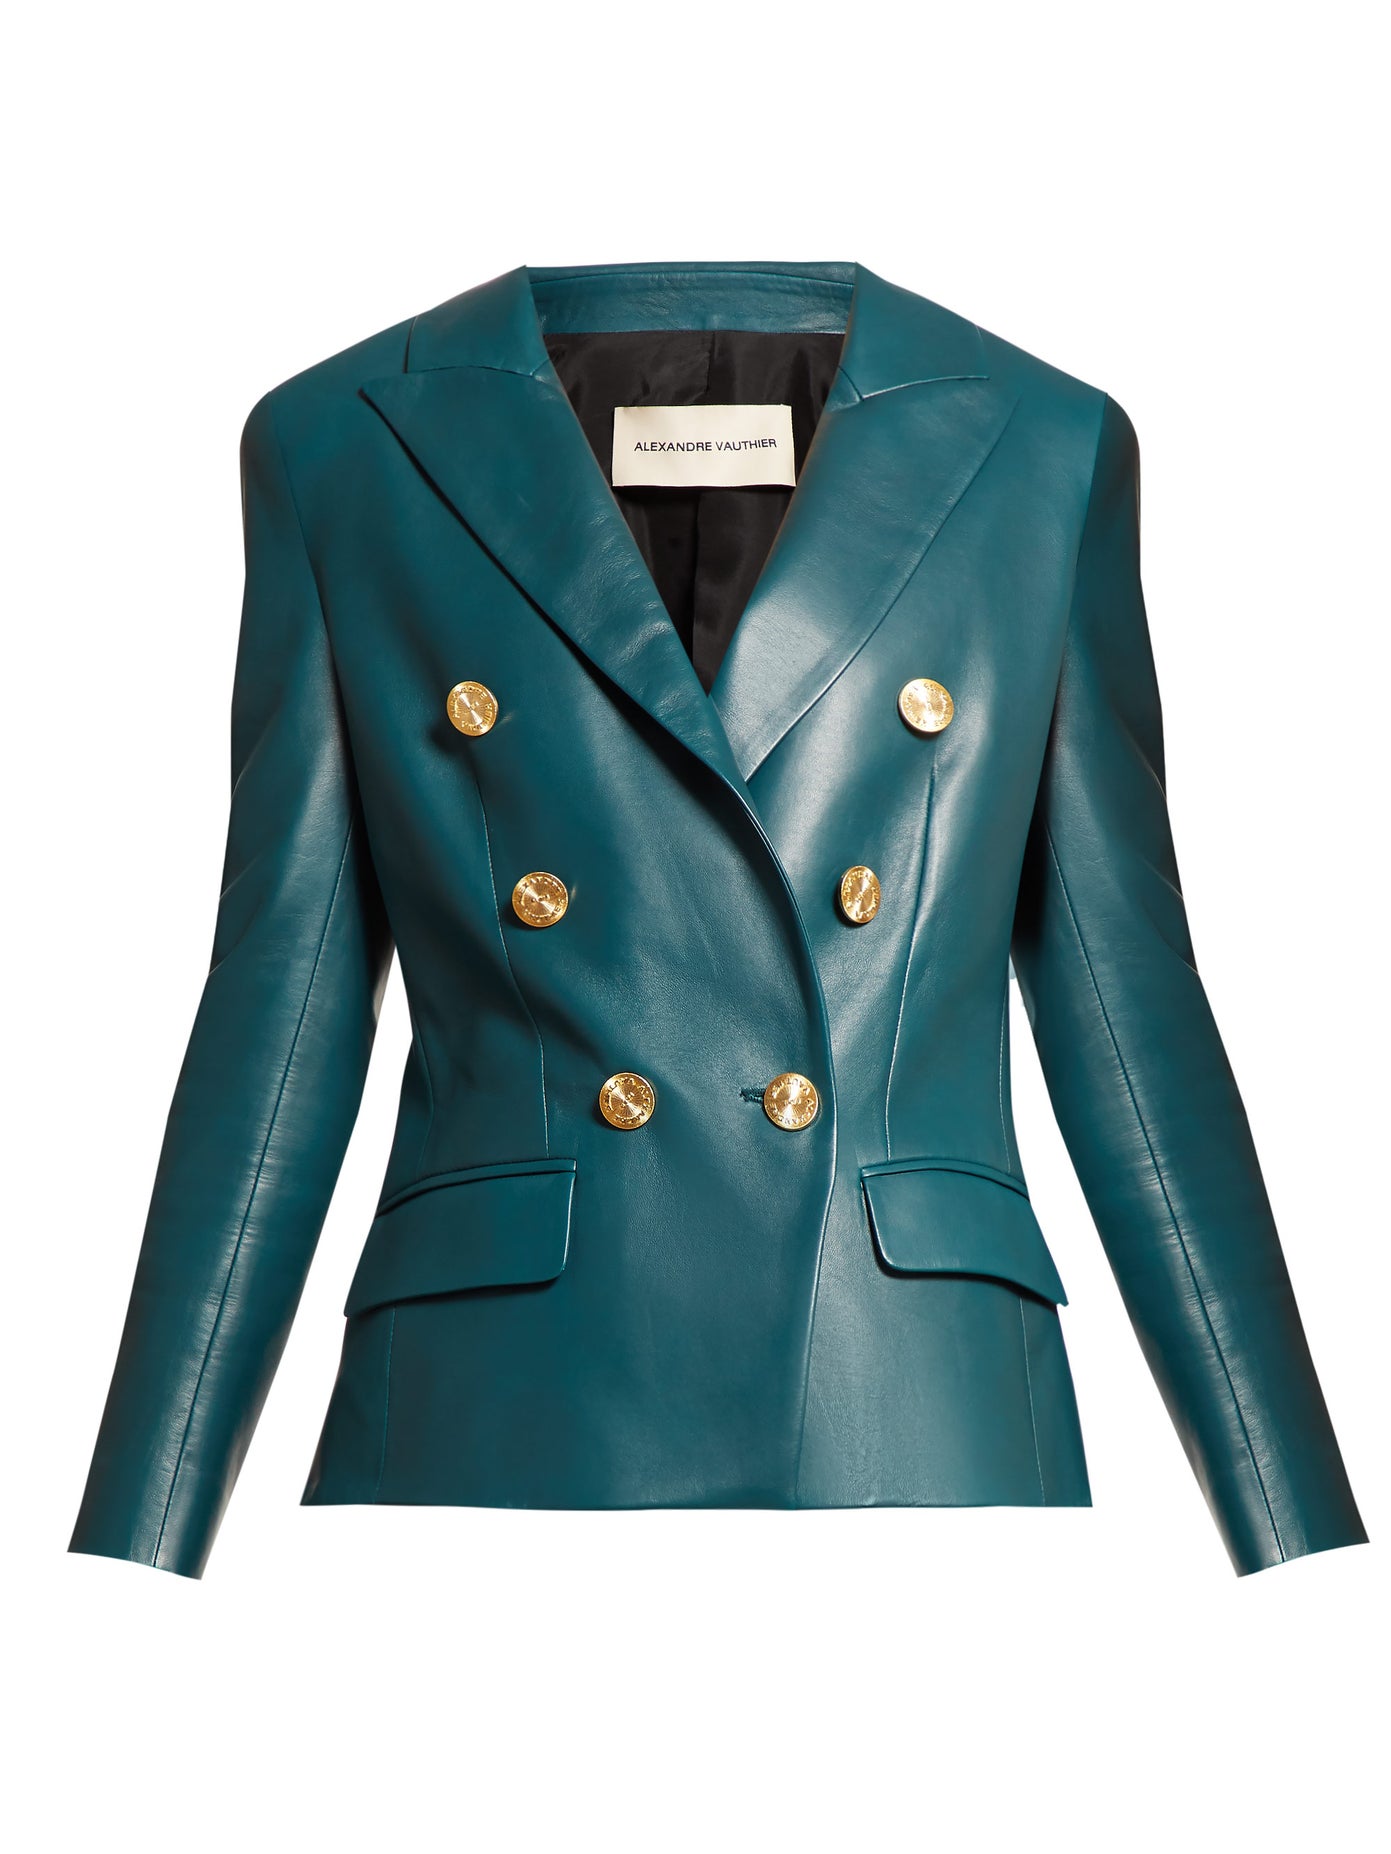 Fall Into Autumn 2019 Colors, forest green, green leather double breasted jacket